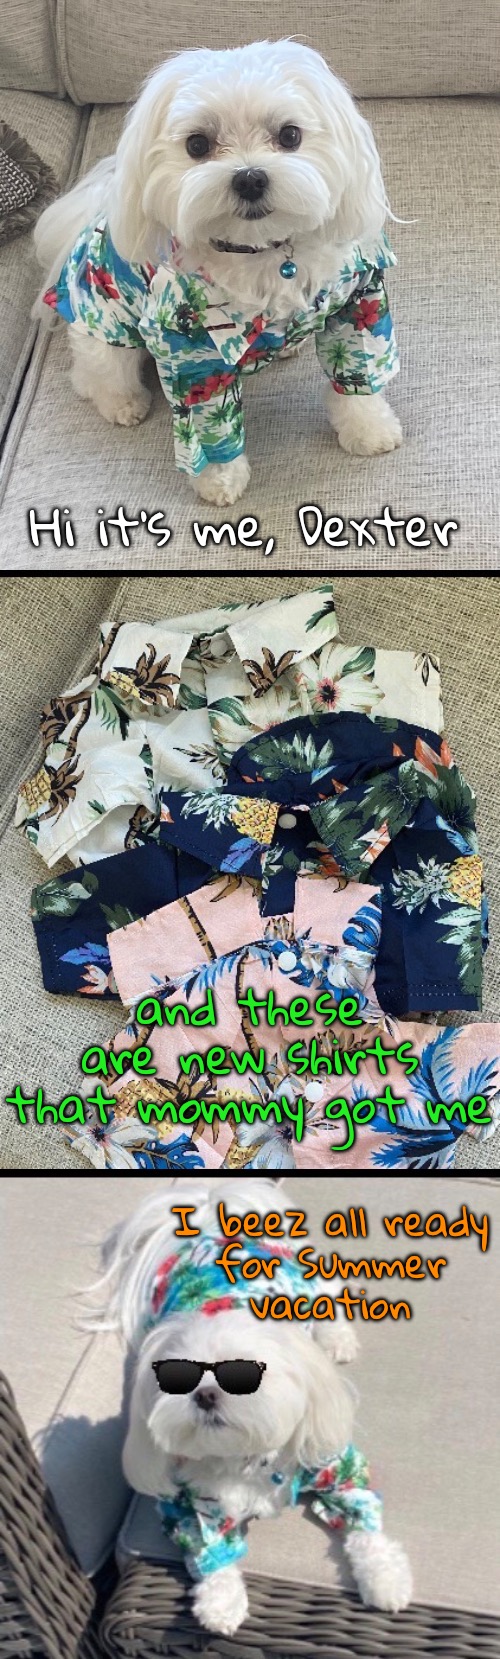 Doggy Bahama Shirts | Hi it’s me, Dexter; and these are new shirts that mommy got me; I beez all ready
for Summer
vacation | image tagged in funny memes,funny dog memes,td1437,dexter | made w/ Imgflip meme maker